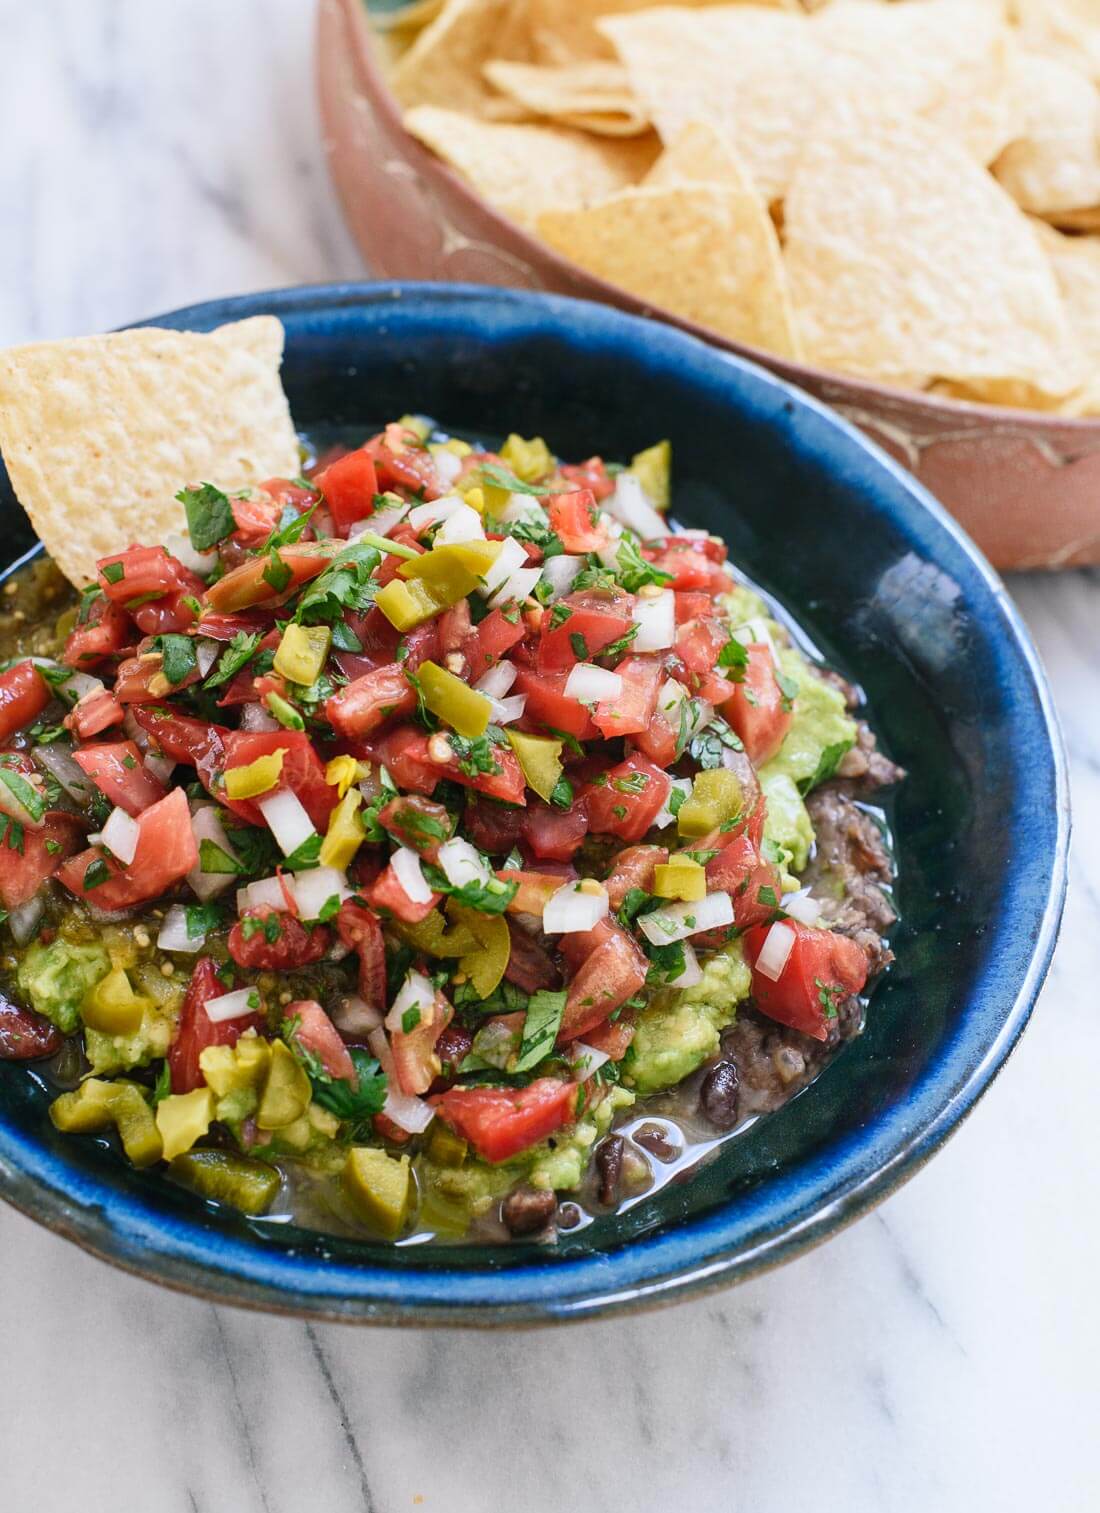 This healthy "seven" layer dip recipe features layers of homemade refried beans, guacamole, salsa verde, pico de gallo and pickled jalapeños! cookieandkate.com